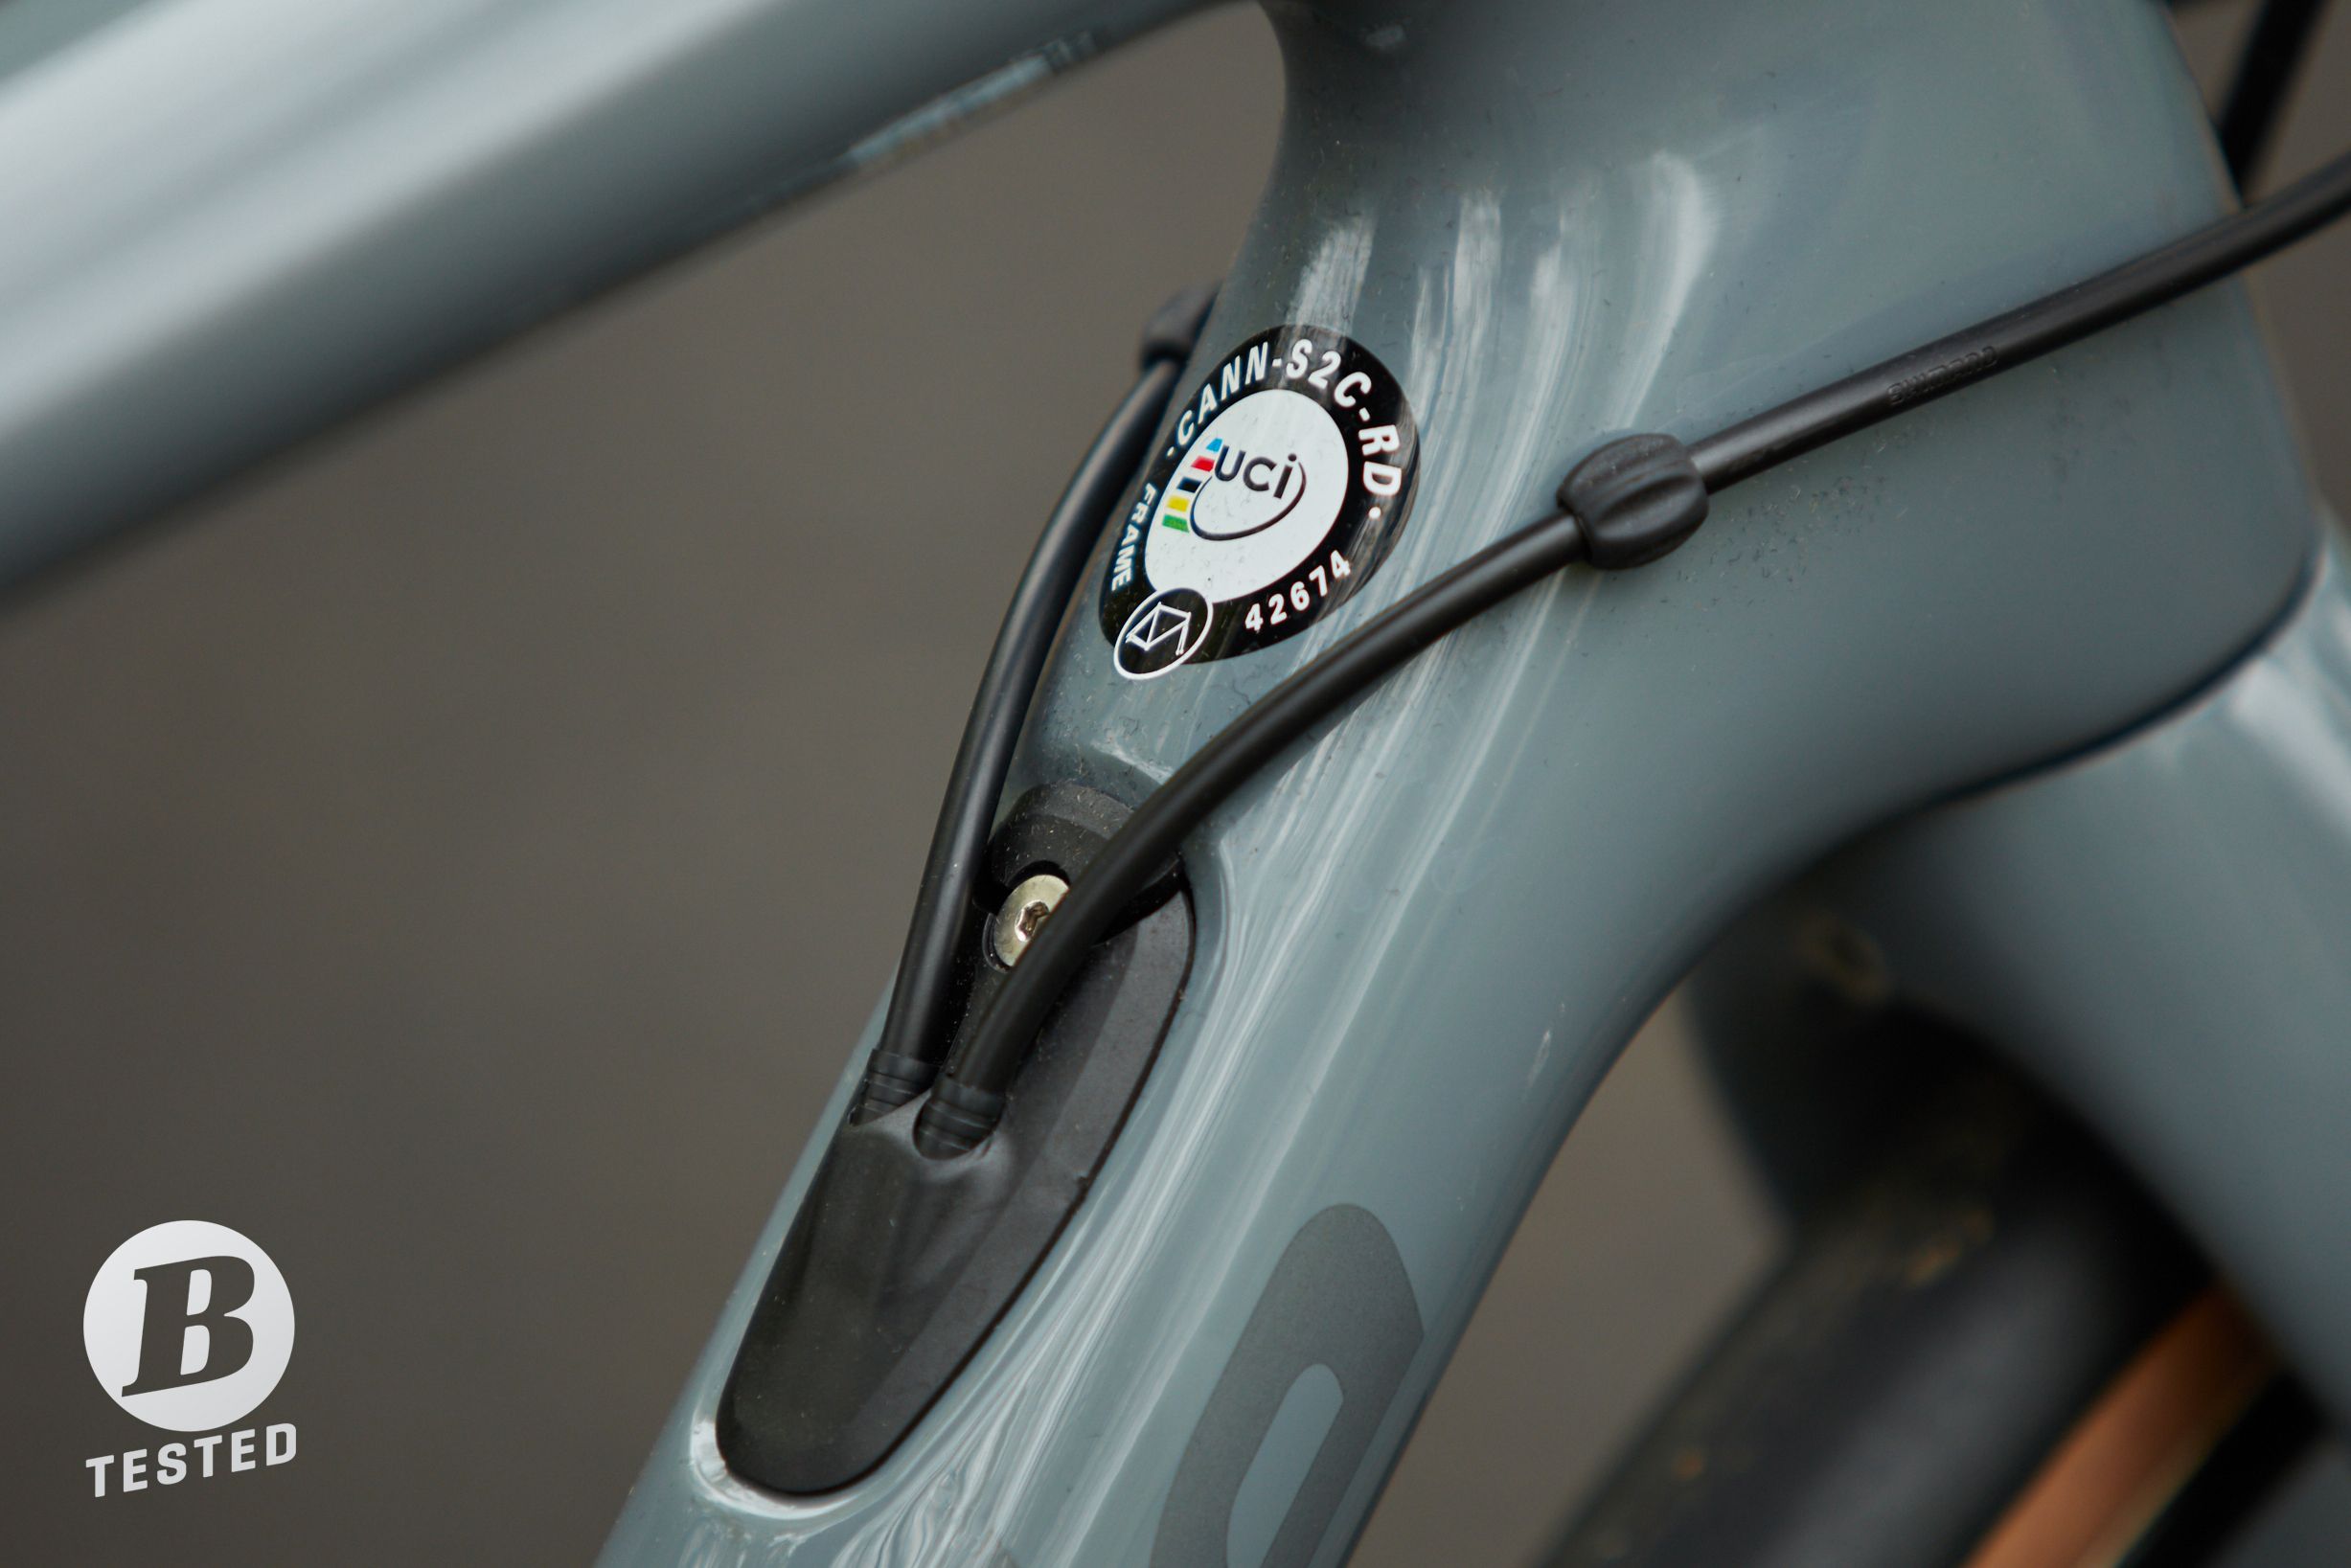 Cannondale Synapse Carbon Disc - An Editors' Choice Winning Road Bike